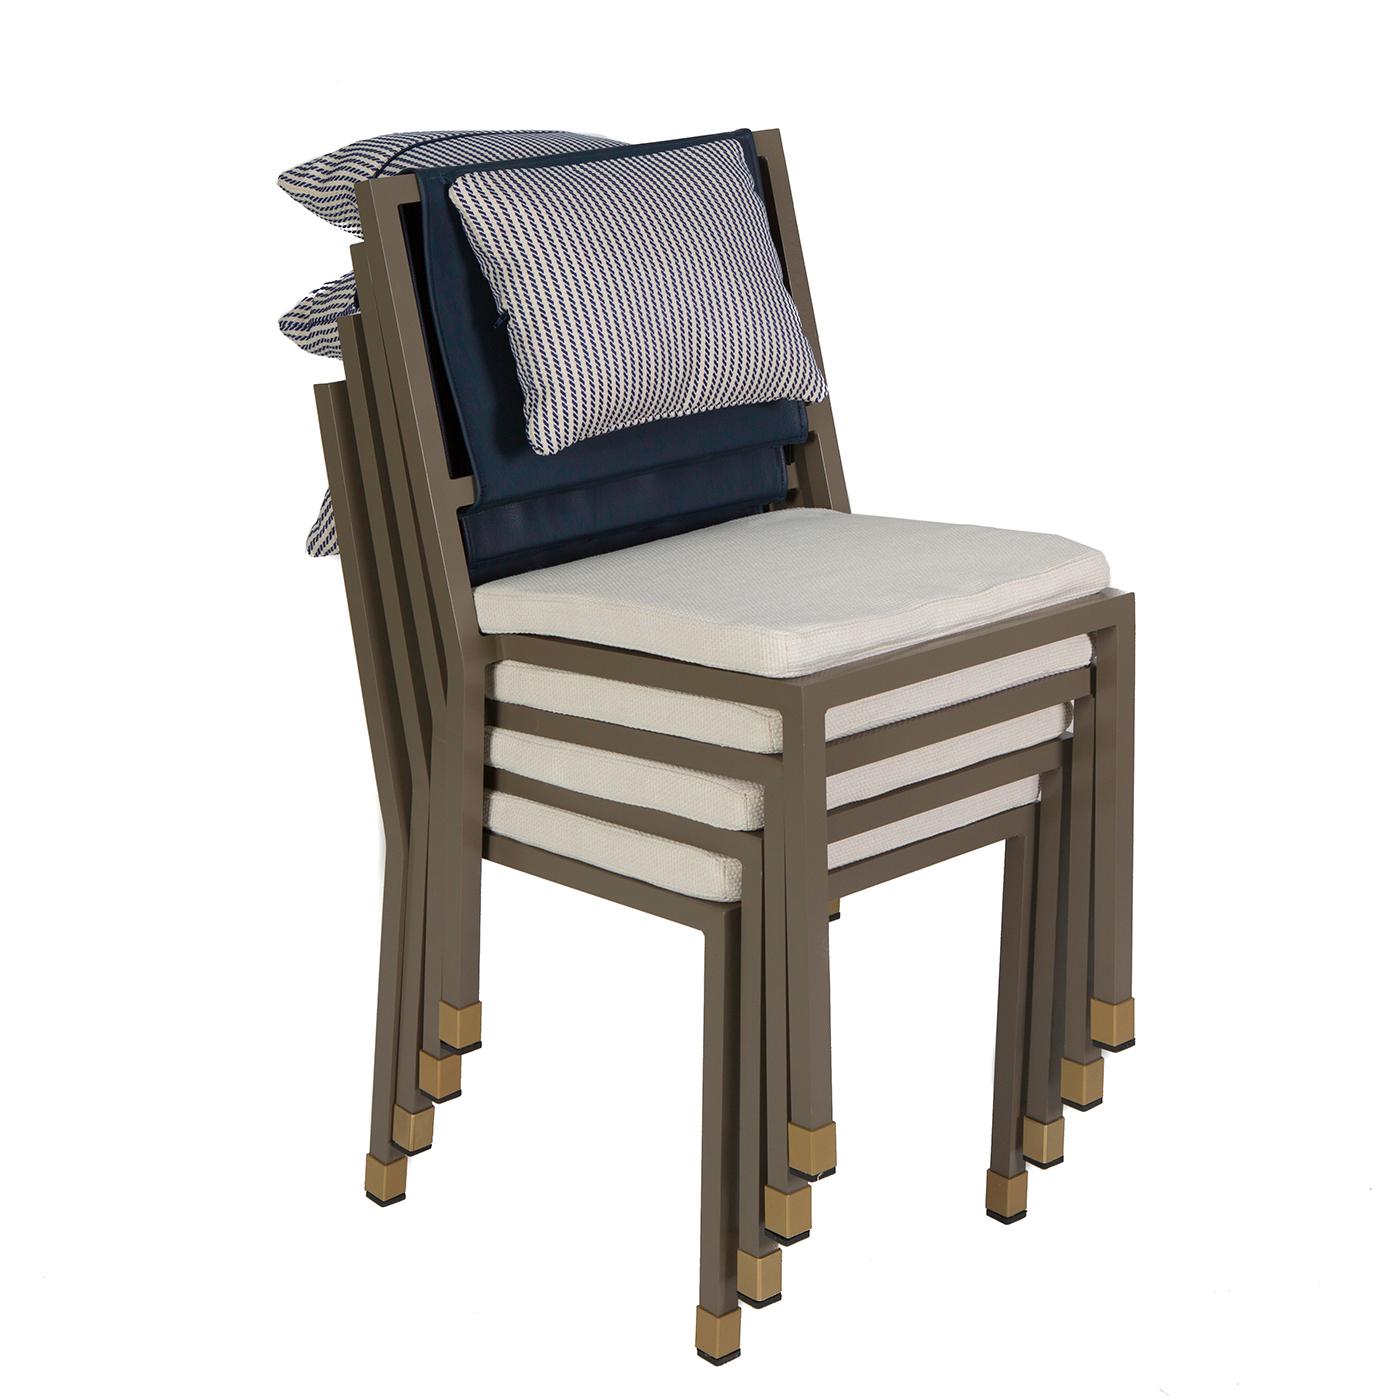 This set of four stackable chairs boasts an elegant and modern design. Handmade with high-quality materials suitable for the outdoors, each chair features a varnished aluminum structure, with legs partly covered in hand-stitched leather and